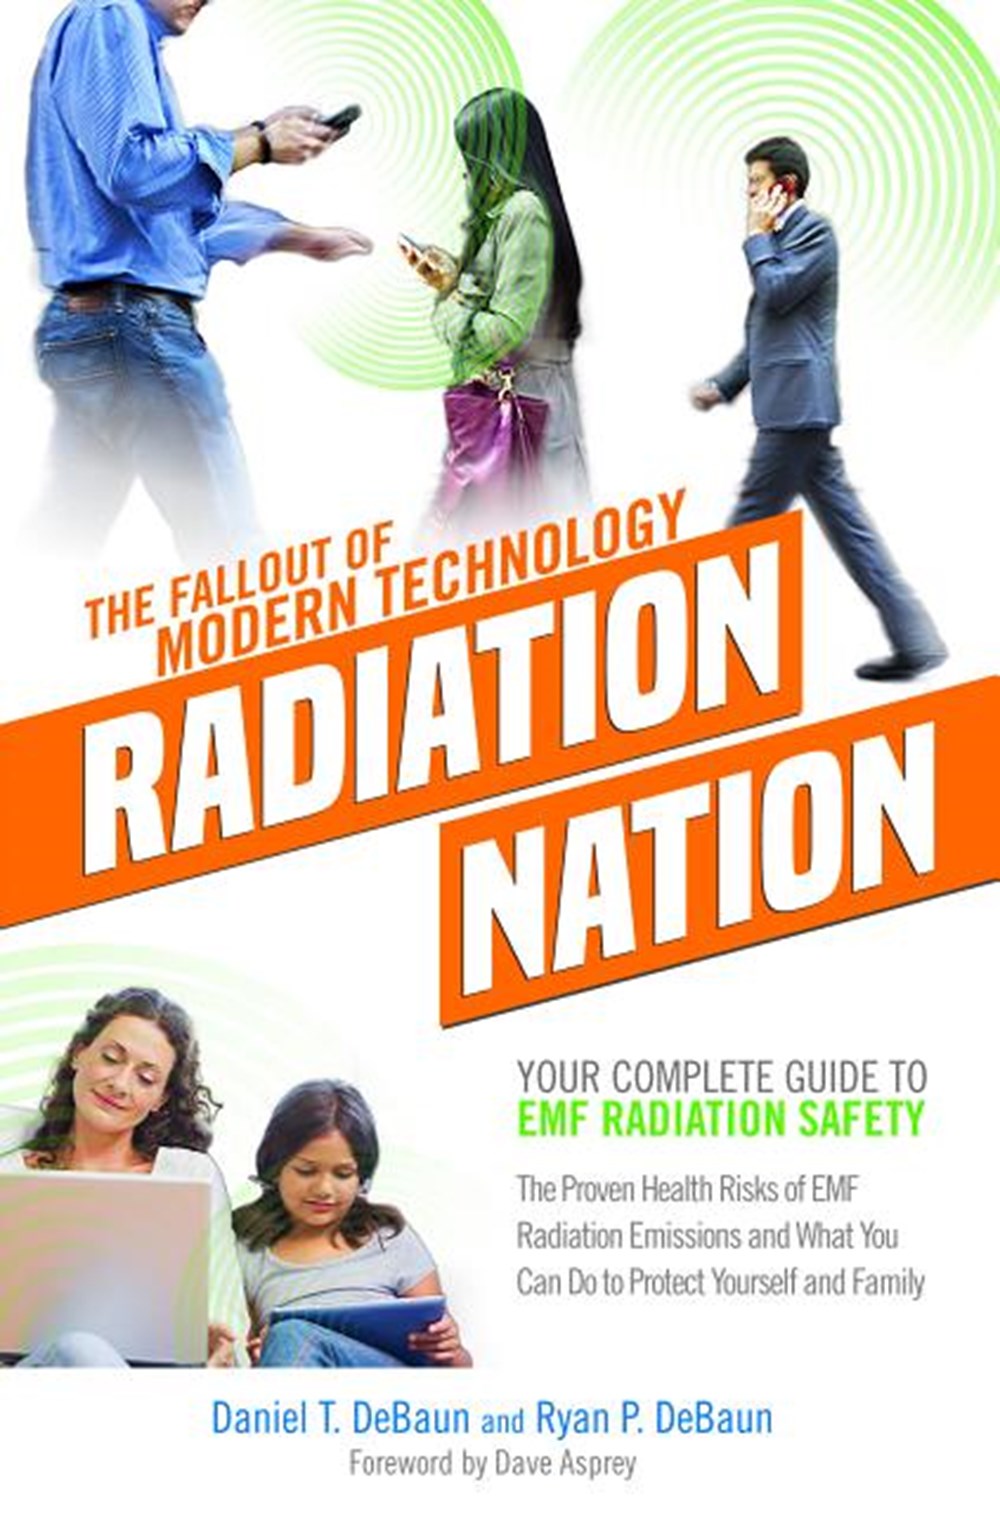 EMF Book: Radiation Nation - Complete Guide to EMF Protection & Safety: The Proven Health Risks of E